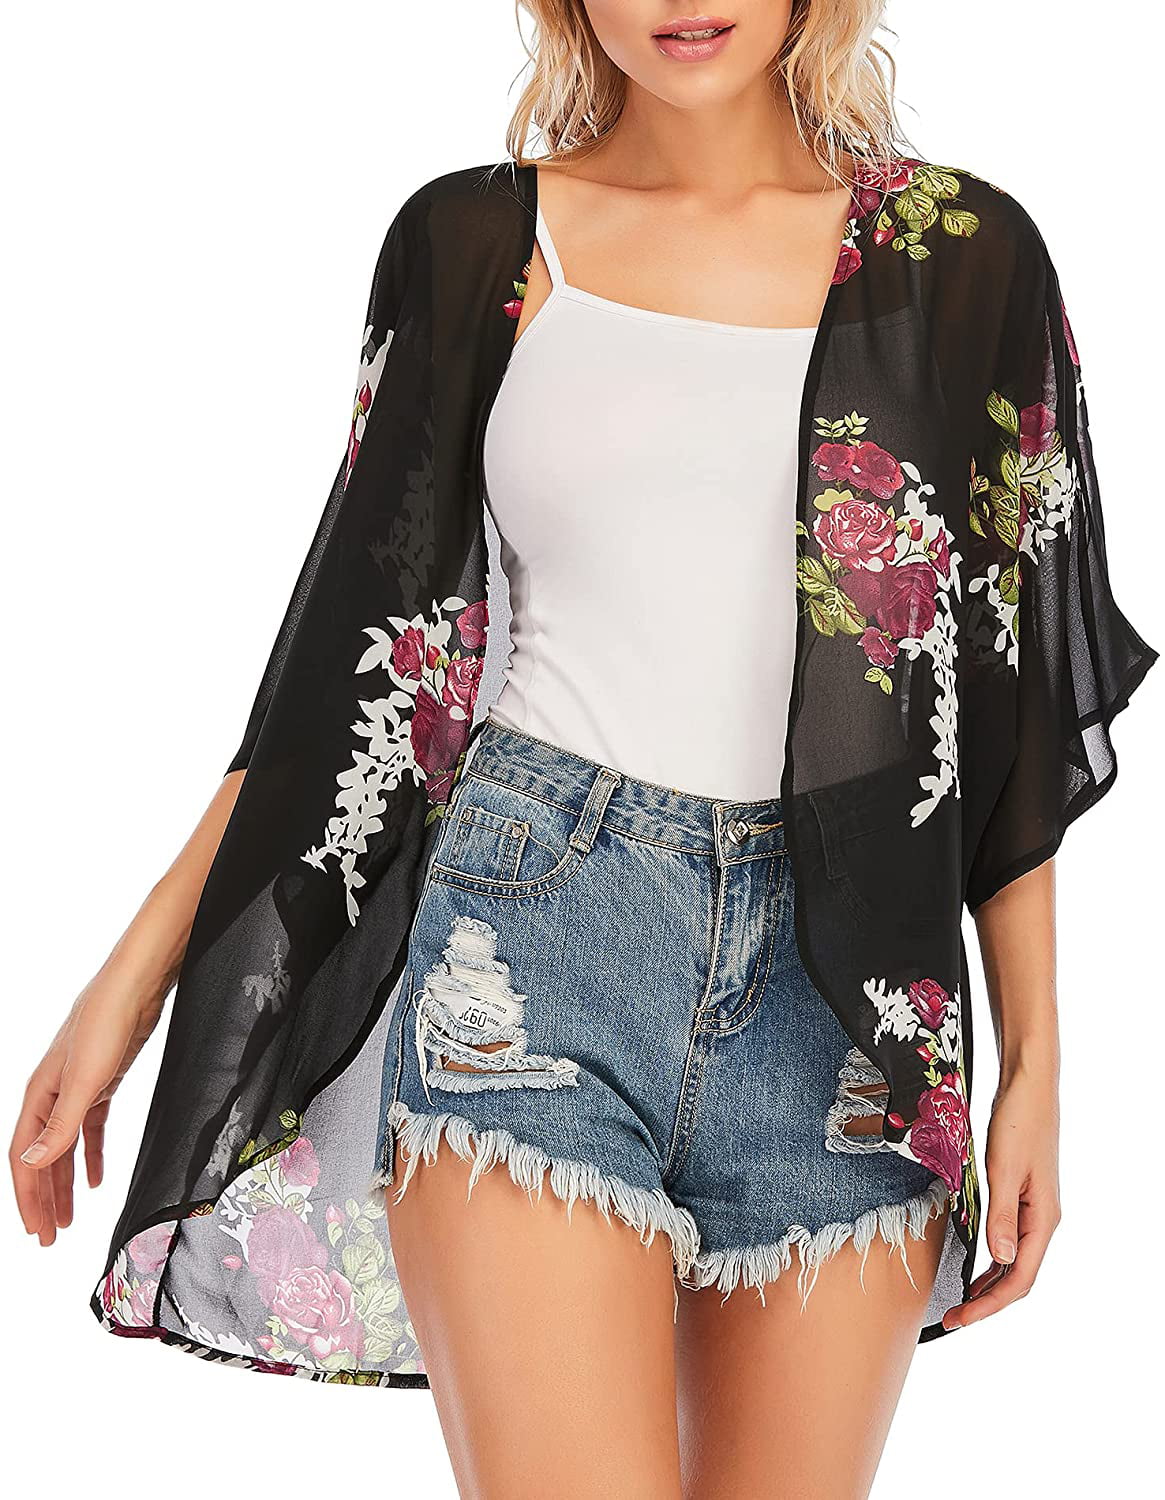 Kimono Cardigans for Women Lightweight Summer Cardigan Floral Open Front Beach Cover Ups Tops 